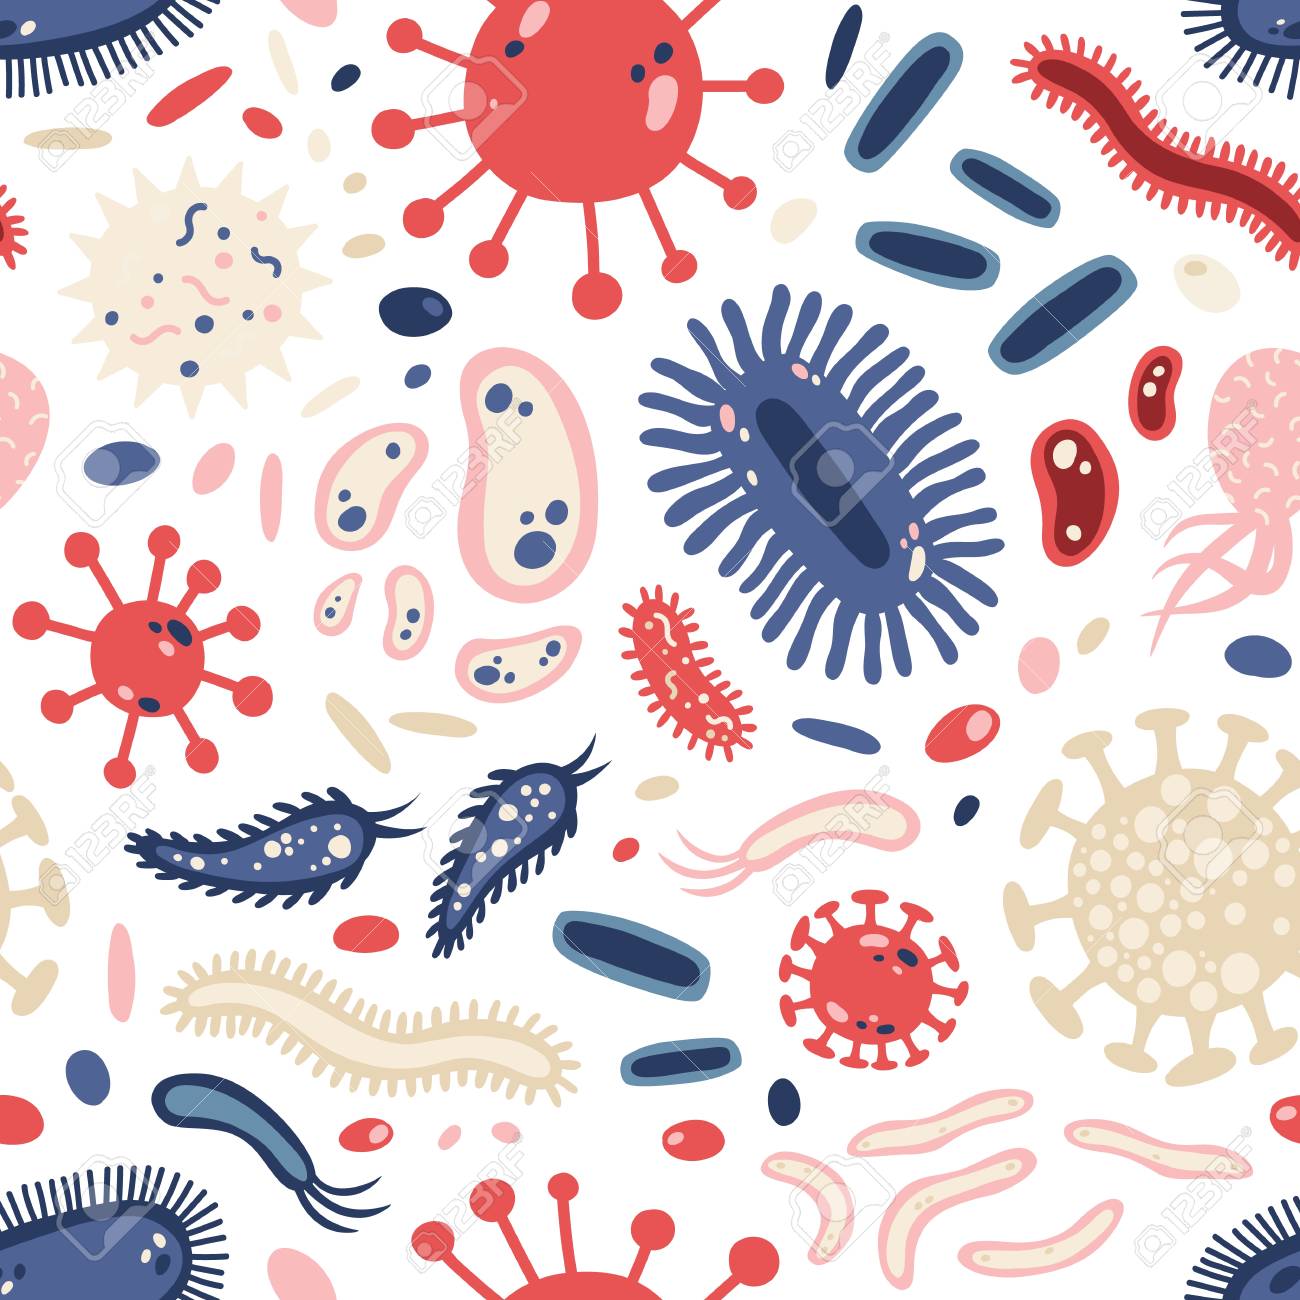 Free download Seamless Pattern With Single Cell Microorganisms Or ...